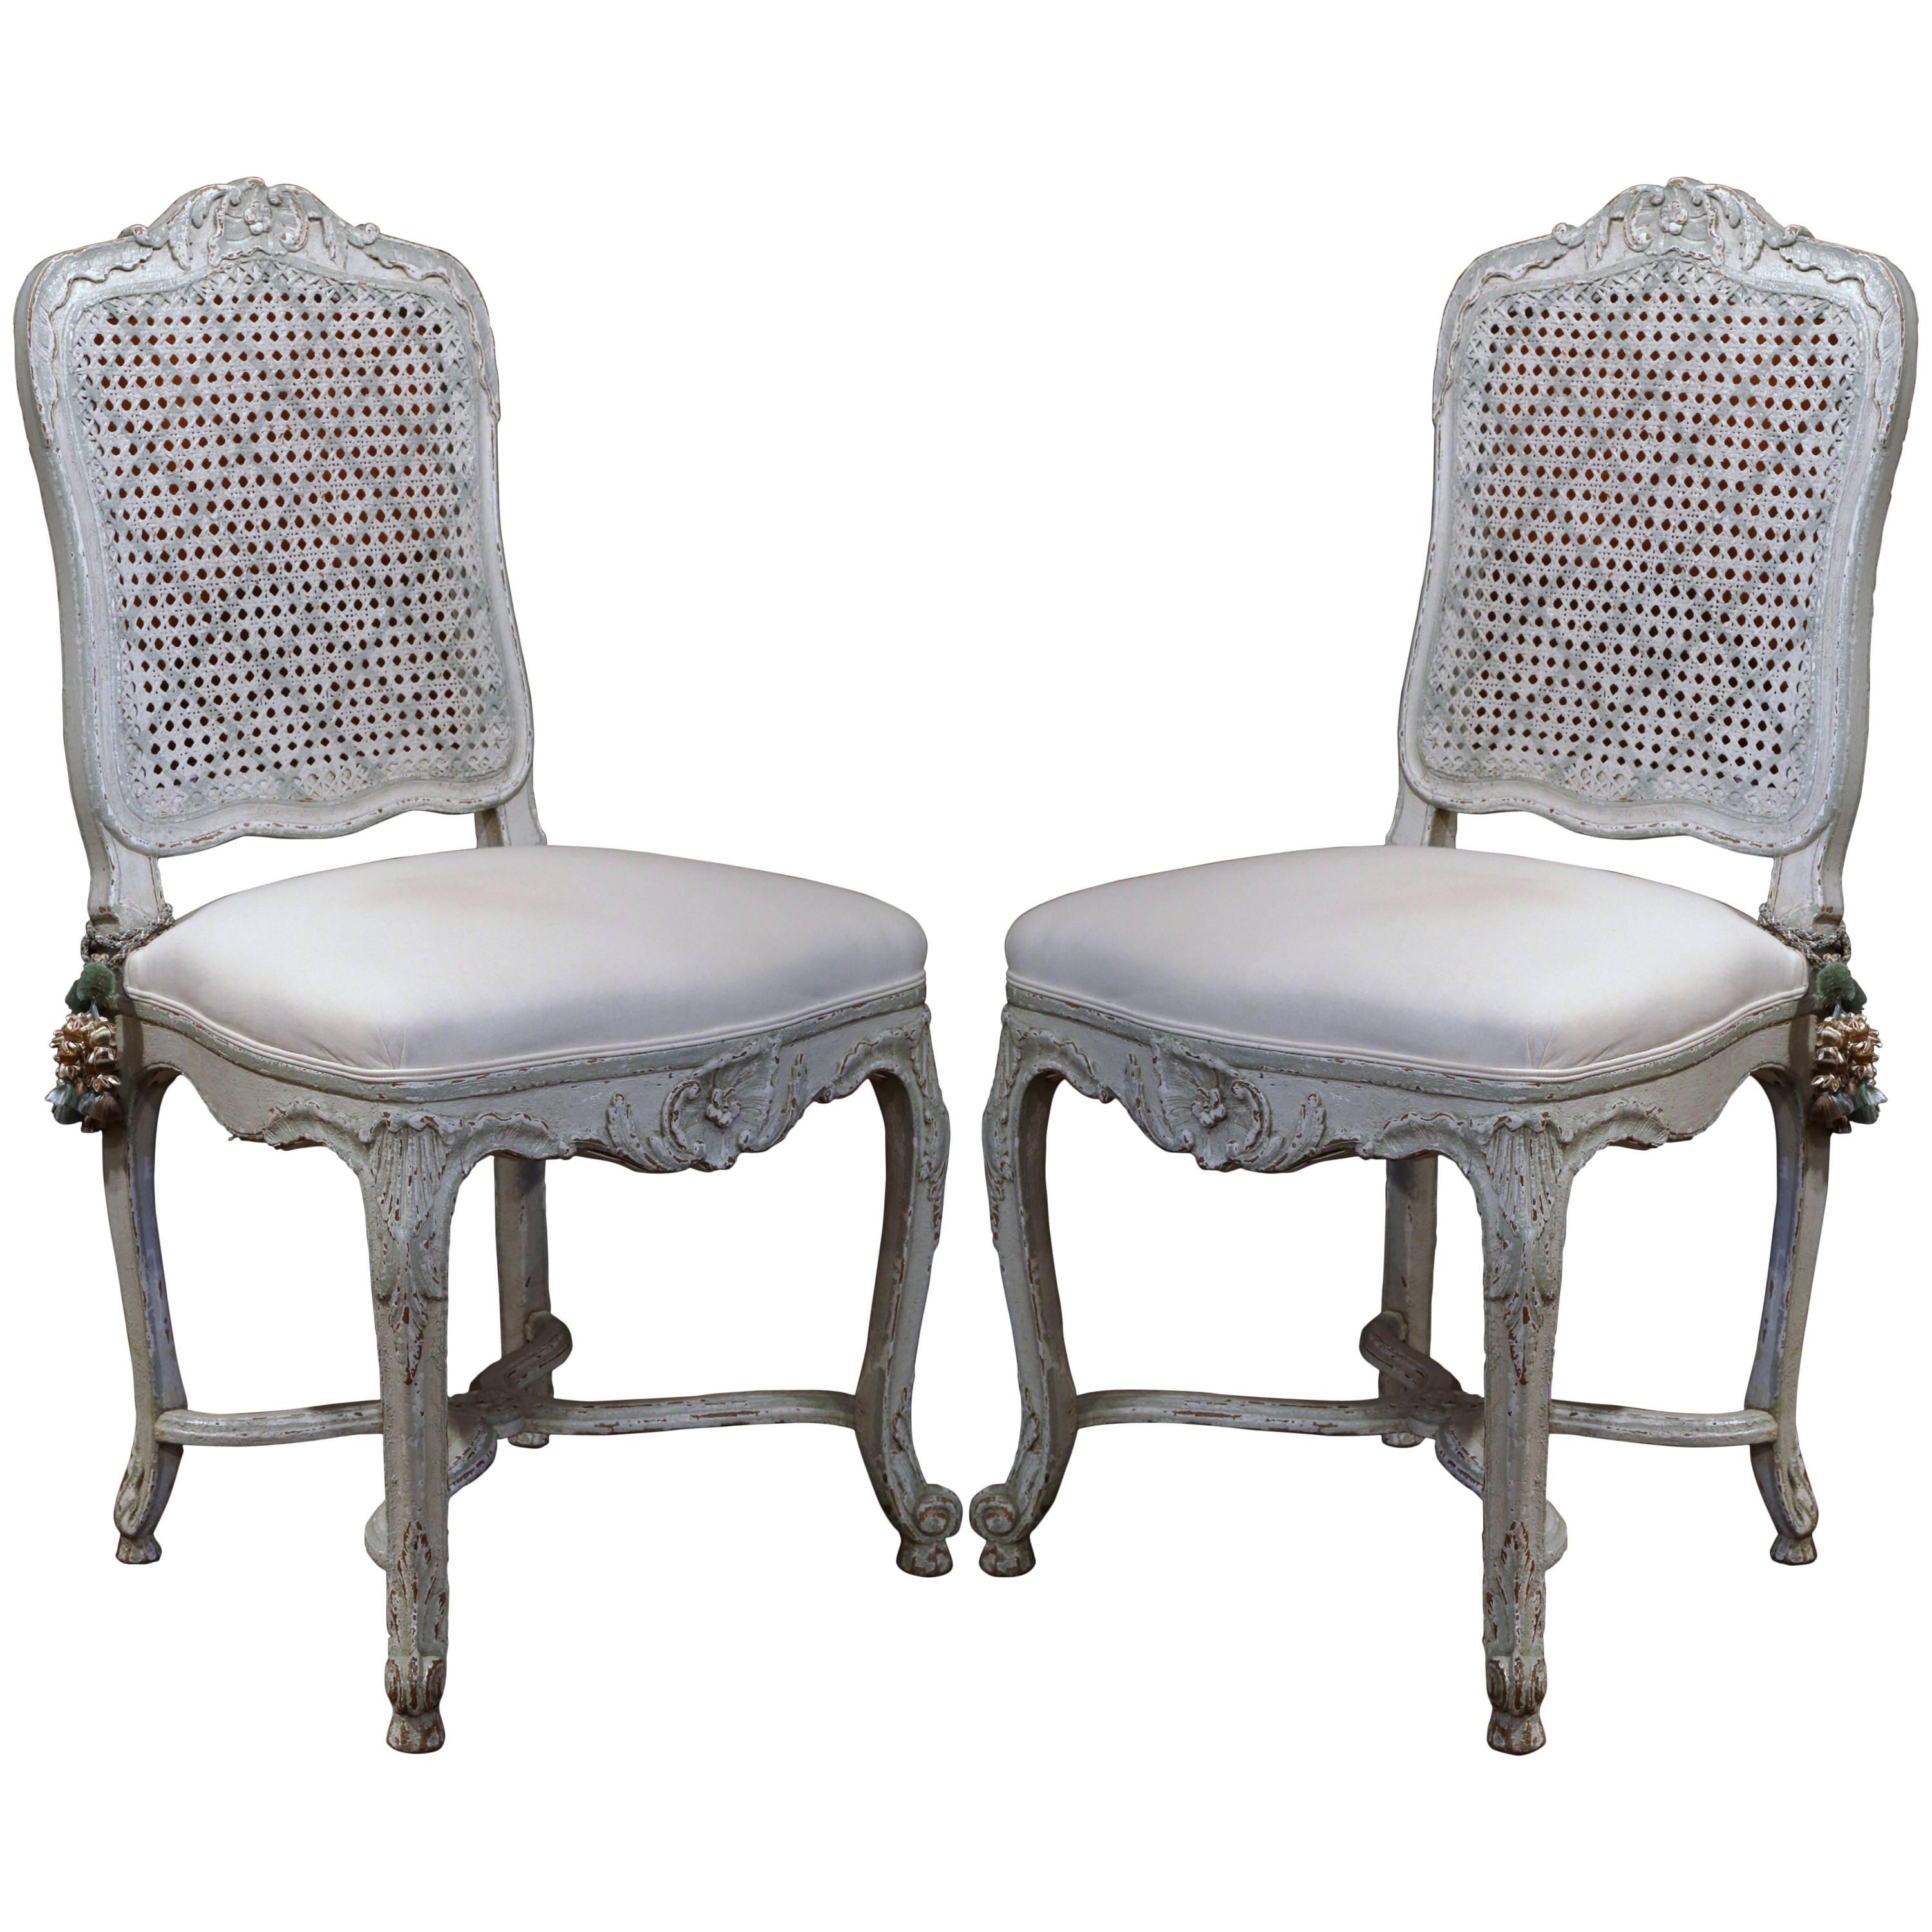 Pair of 19th Century French Louis XV Gray Painted Side Chairs with Cane Back